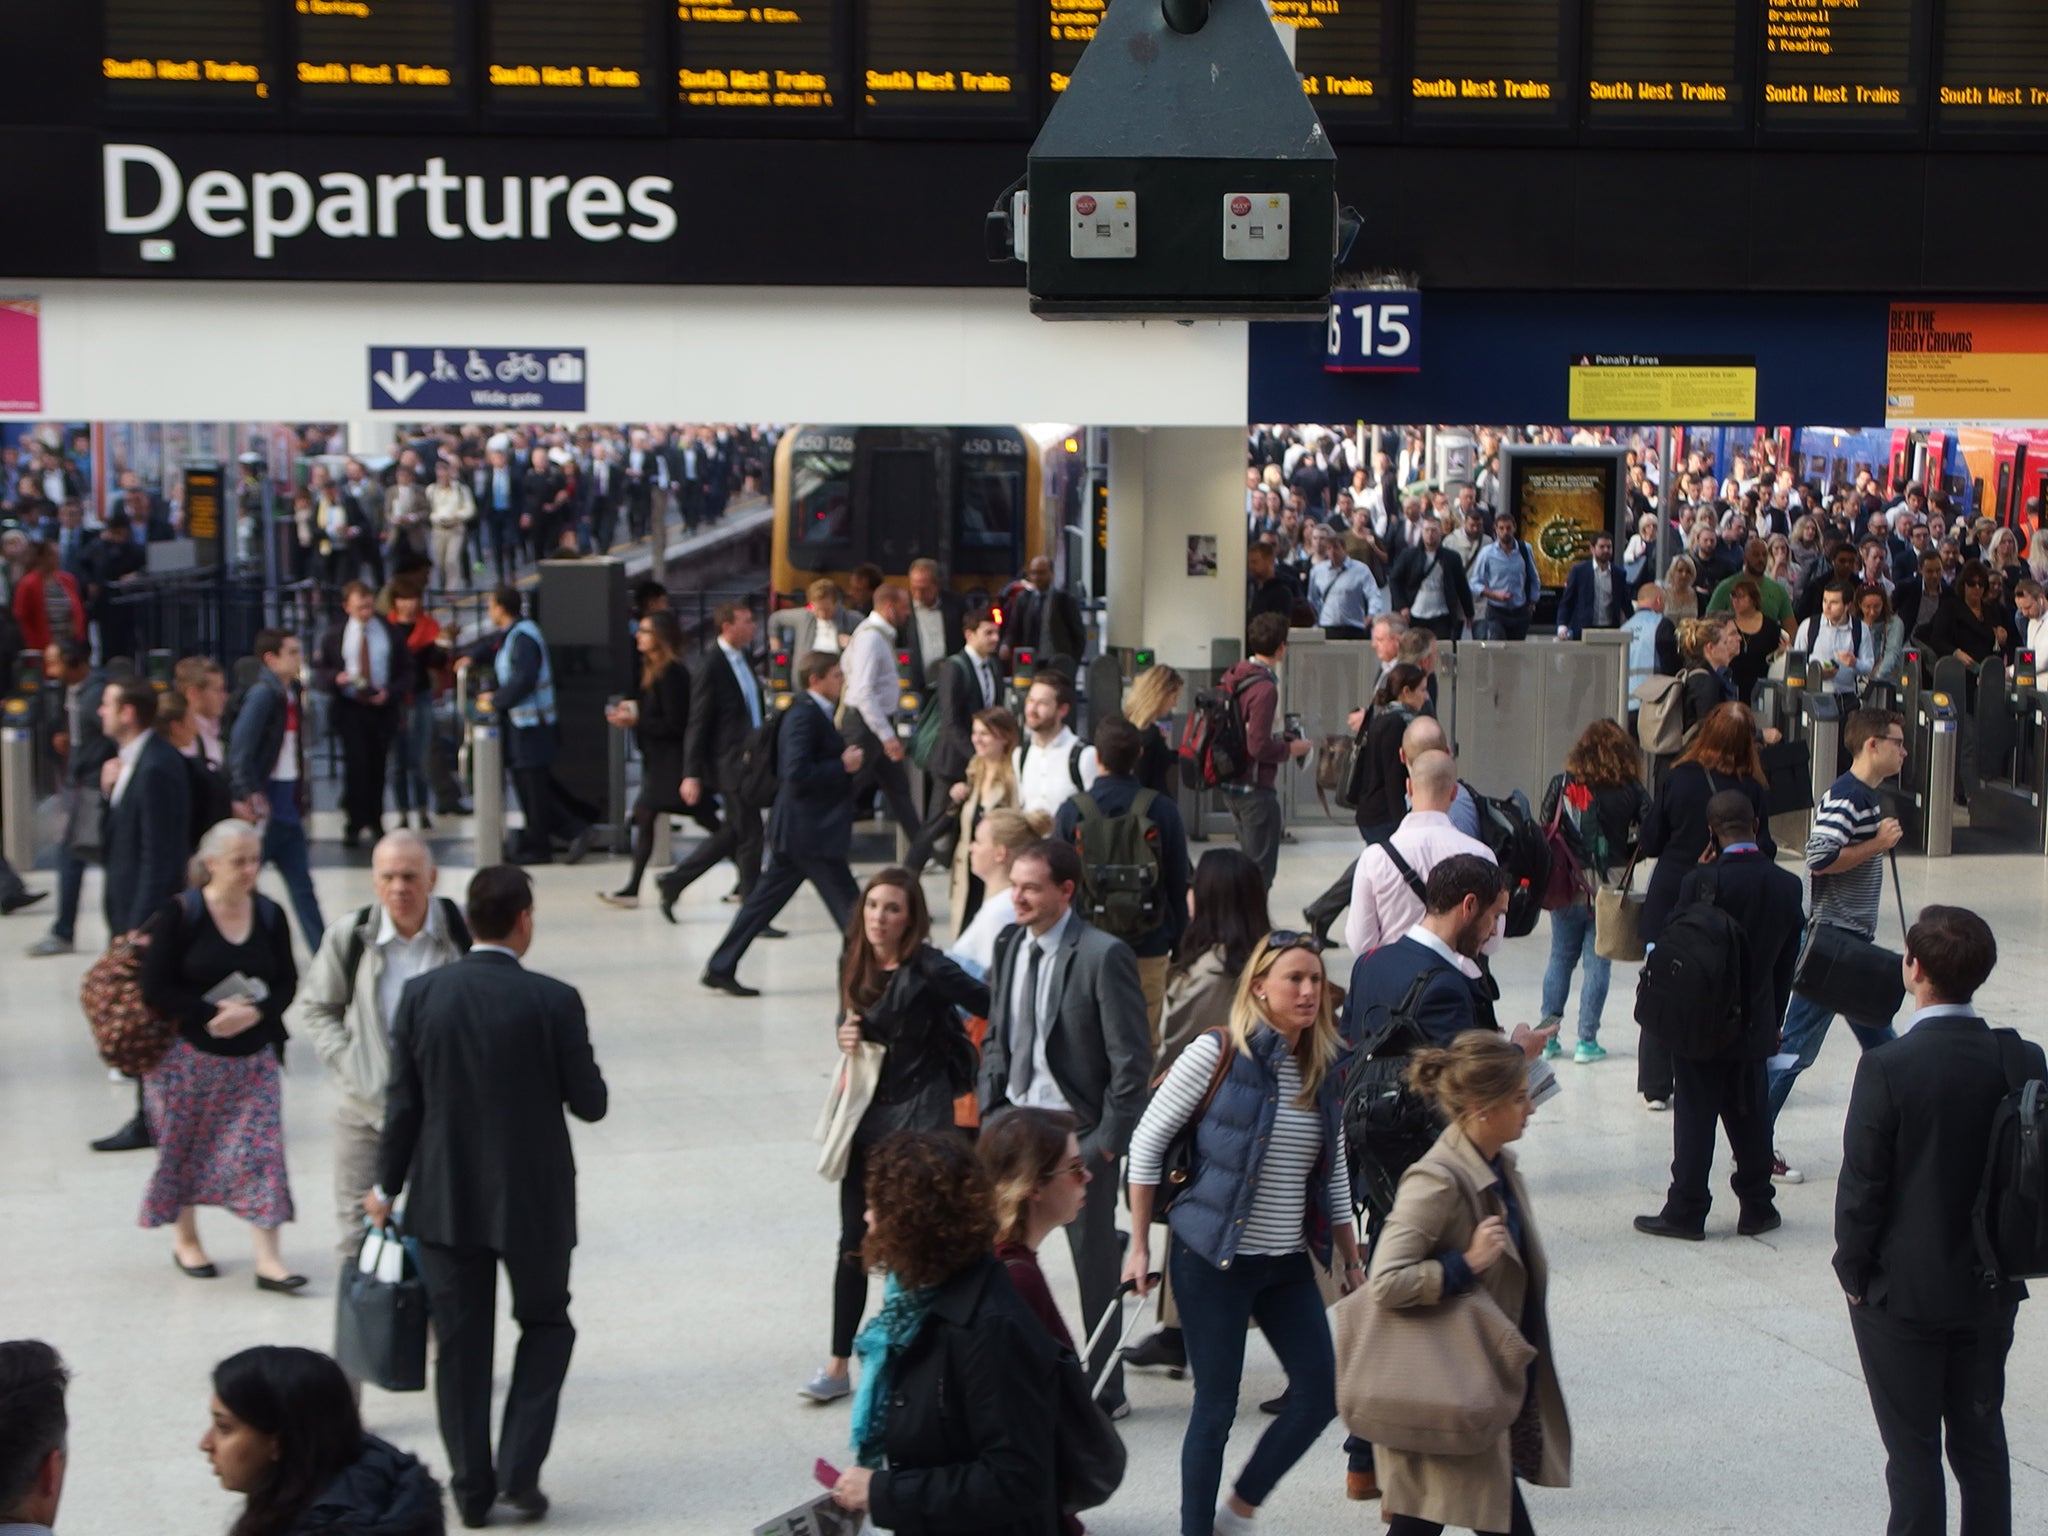 Waterloo is expected to be the first station in Europe to reach 100 million passengers in a year